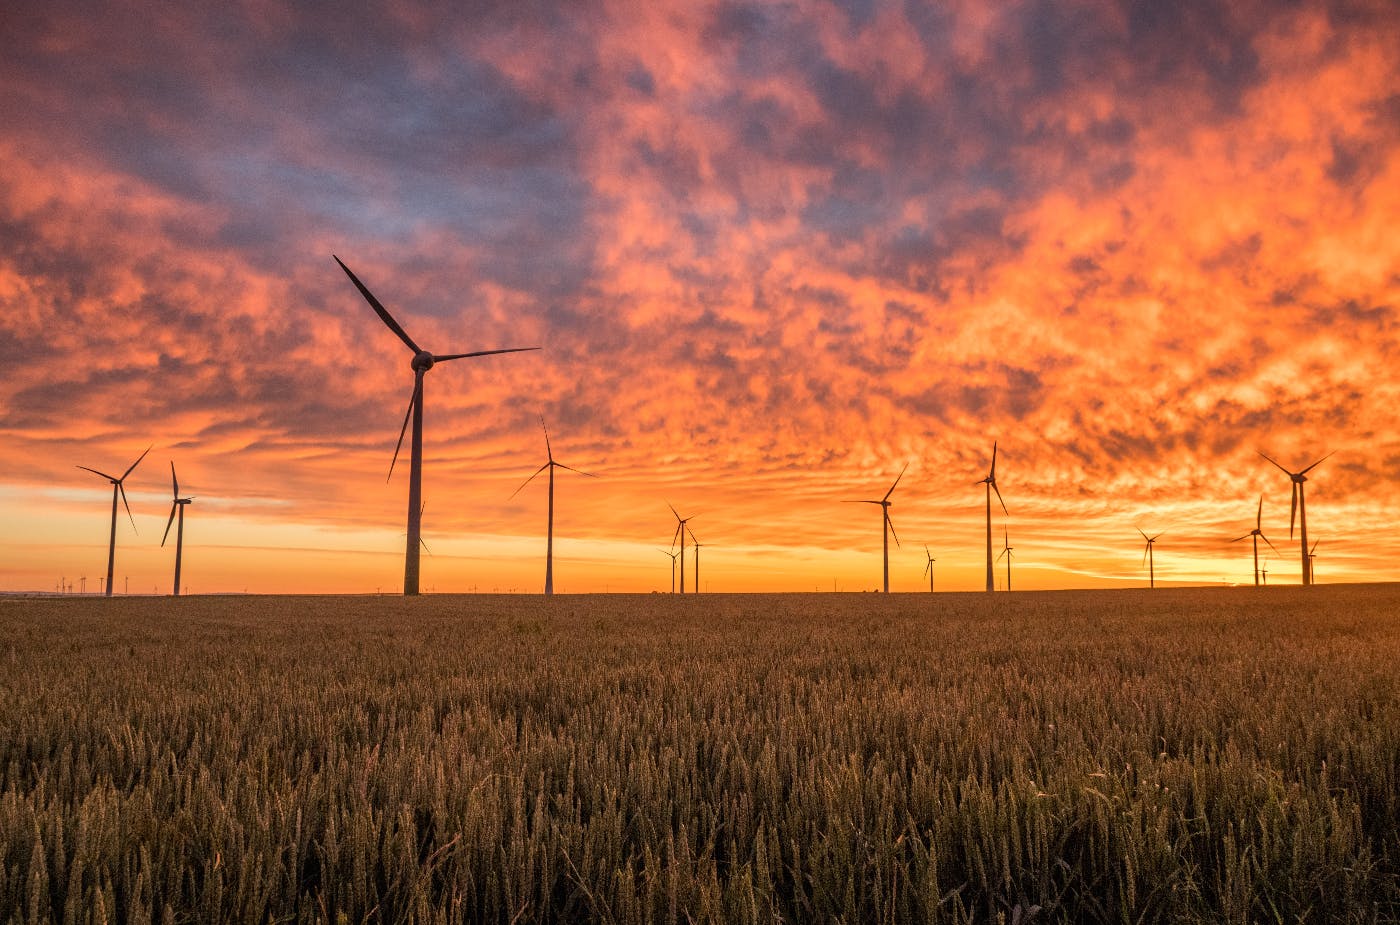 Wind turbines in a wheat field at sunset